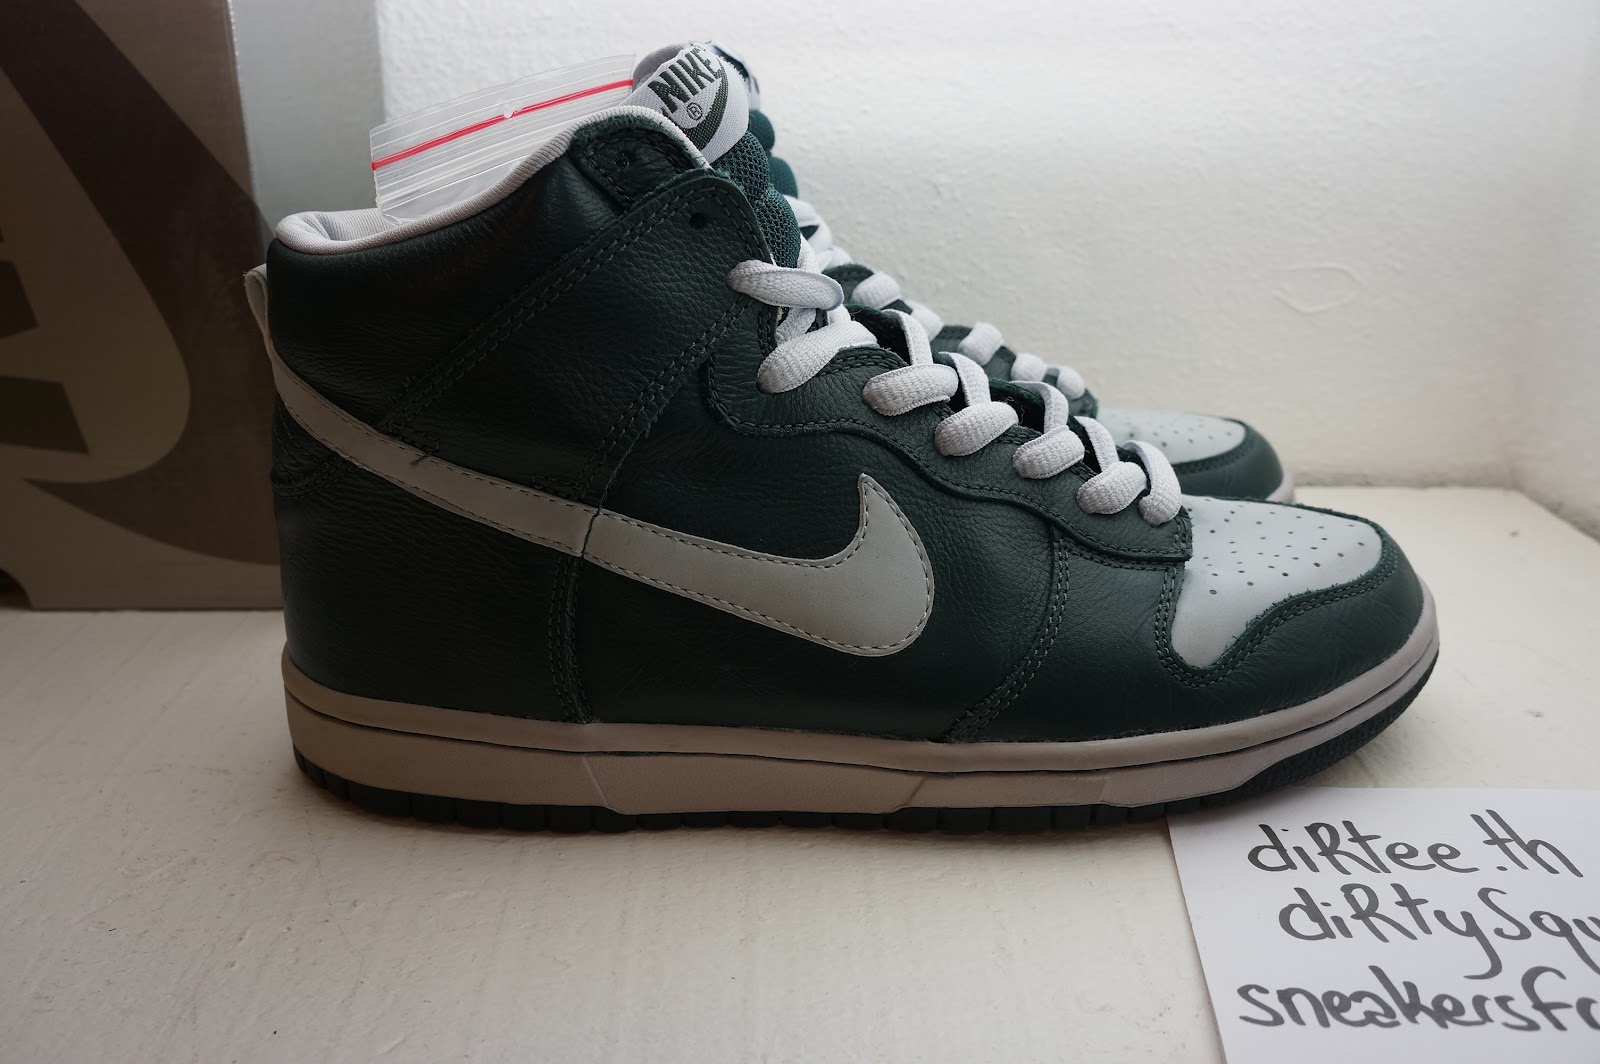 sneakers from Paris: NIKE SB - Dunk High Pro SB - Ghost Olive